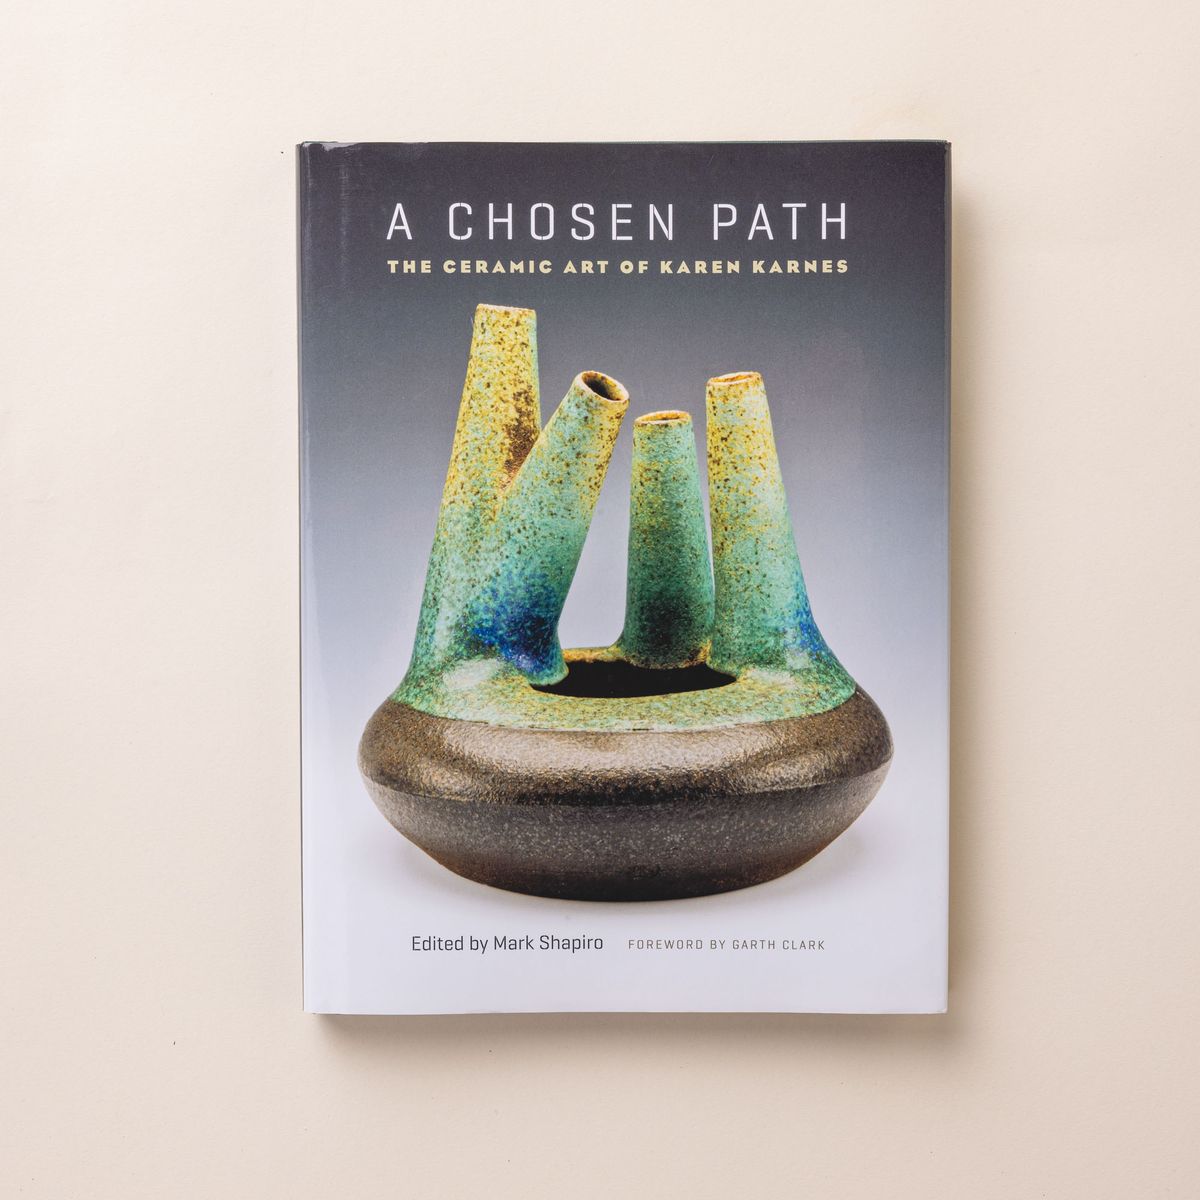 A hardcover book that reads "A Chosen Path" featuring a pottery art piece.